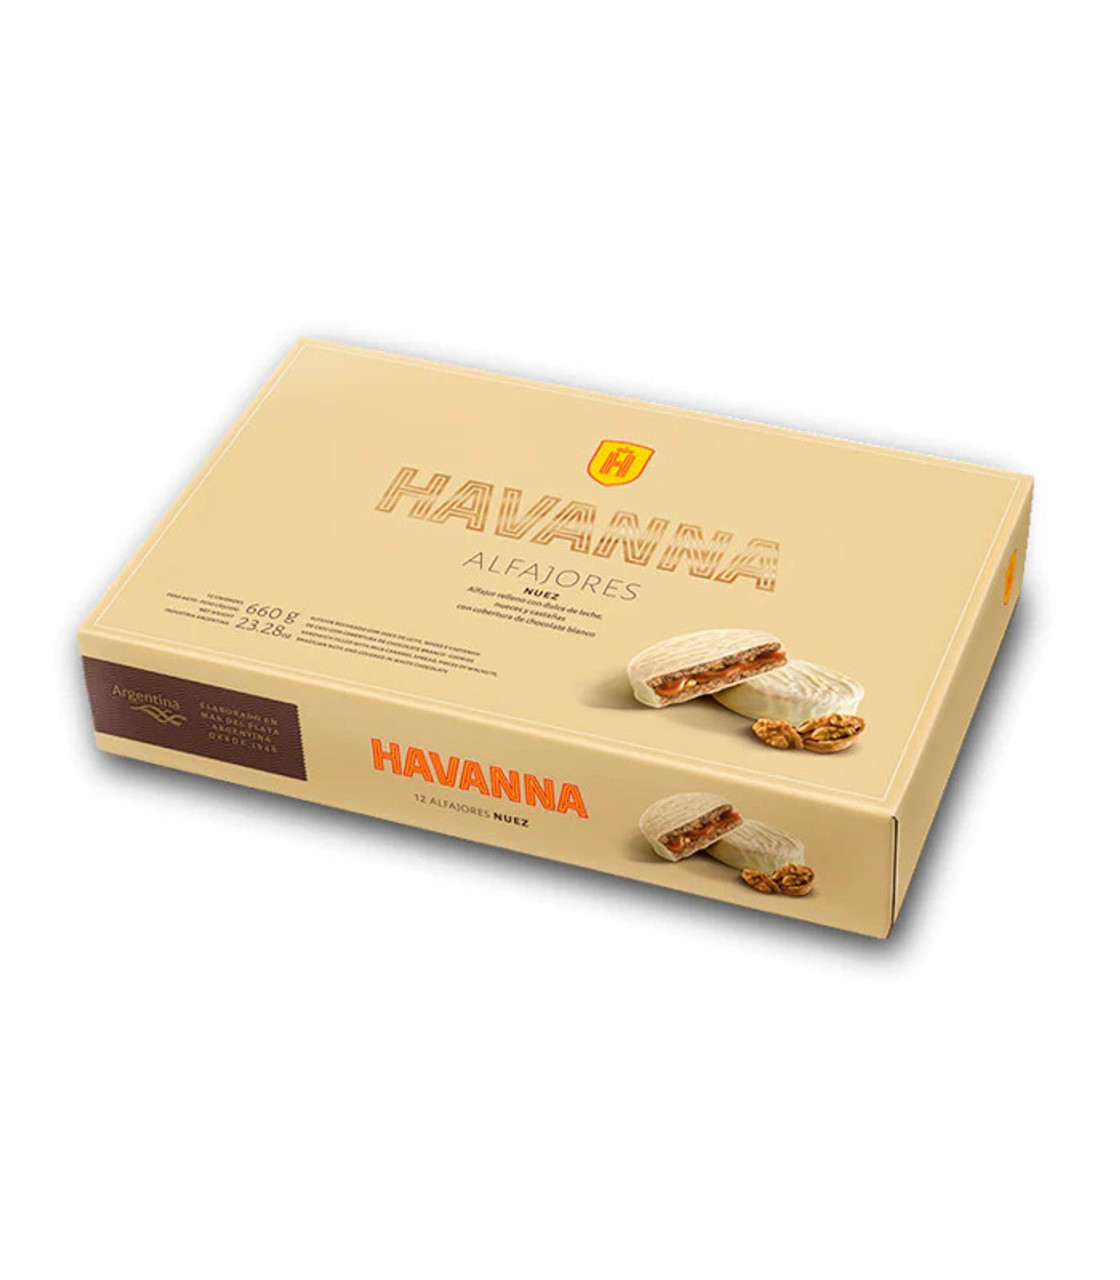 Havanna Alfajor White Chocolate with Nuts and Dulce de Leche (box of 6)